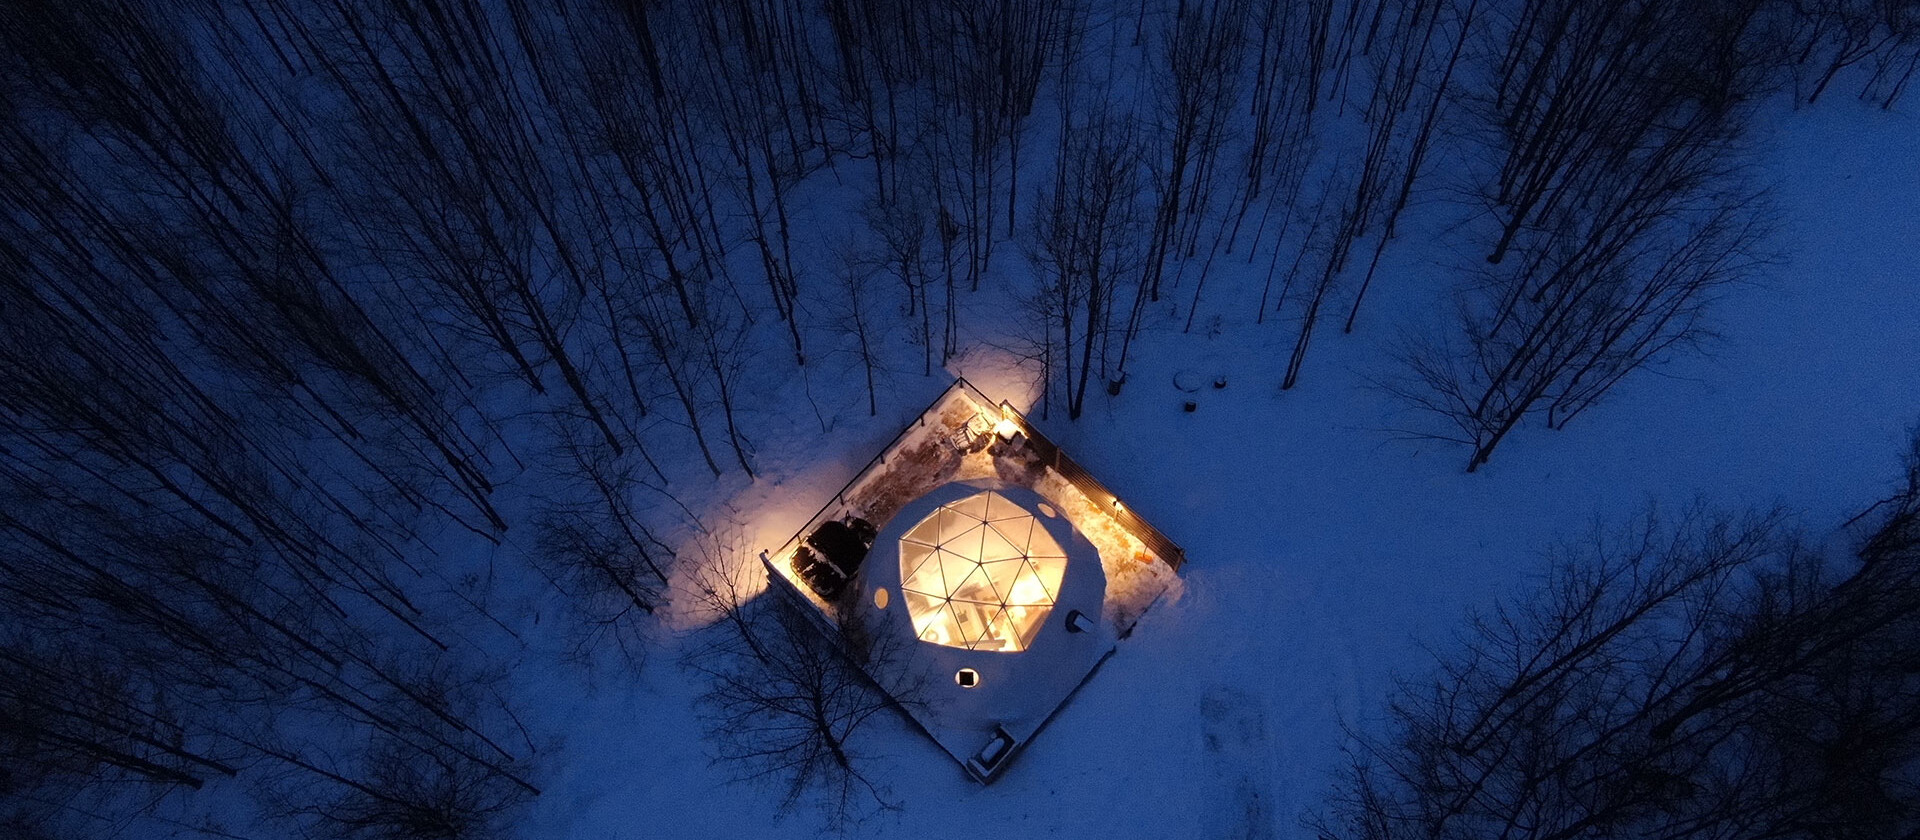 Winter Glamping with Propane: A Cozy and Convenient Adventure